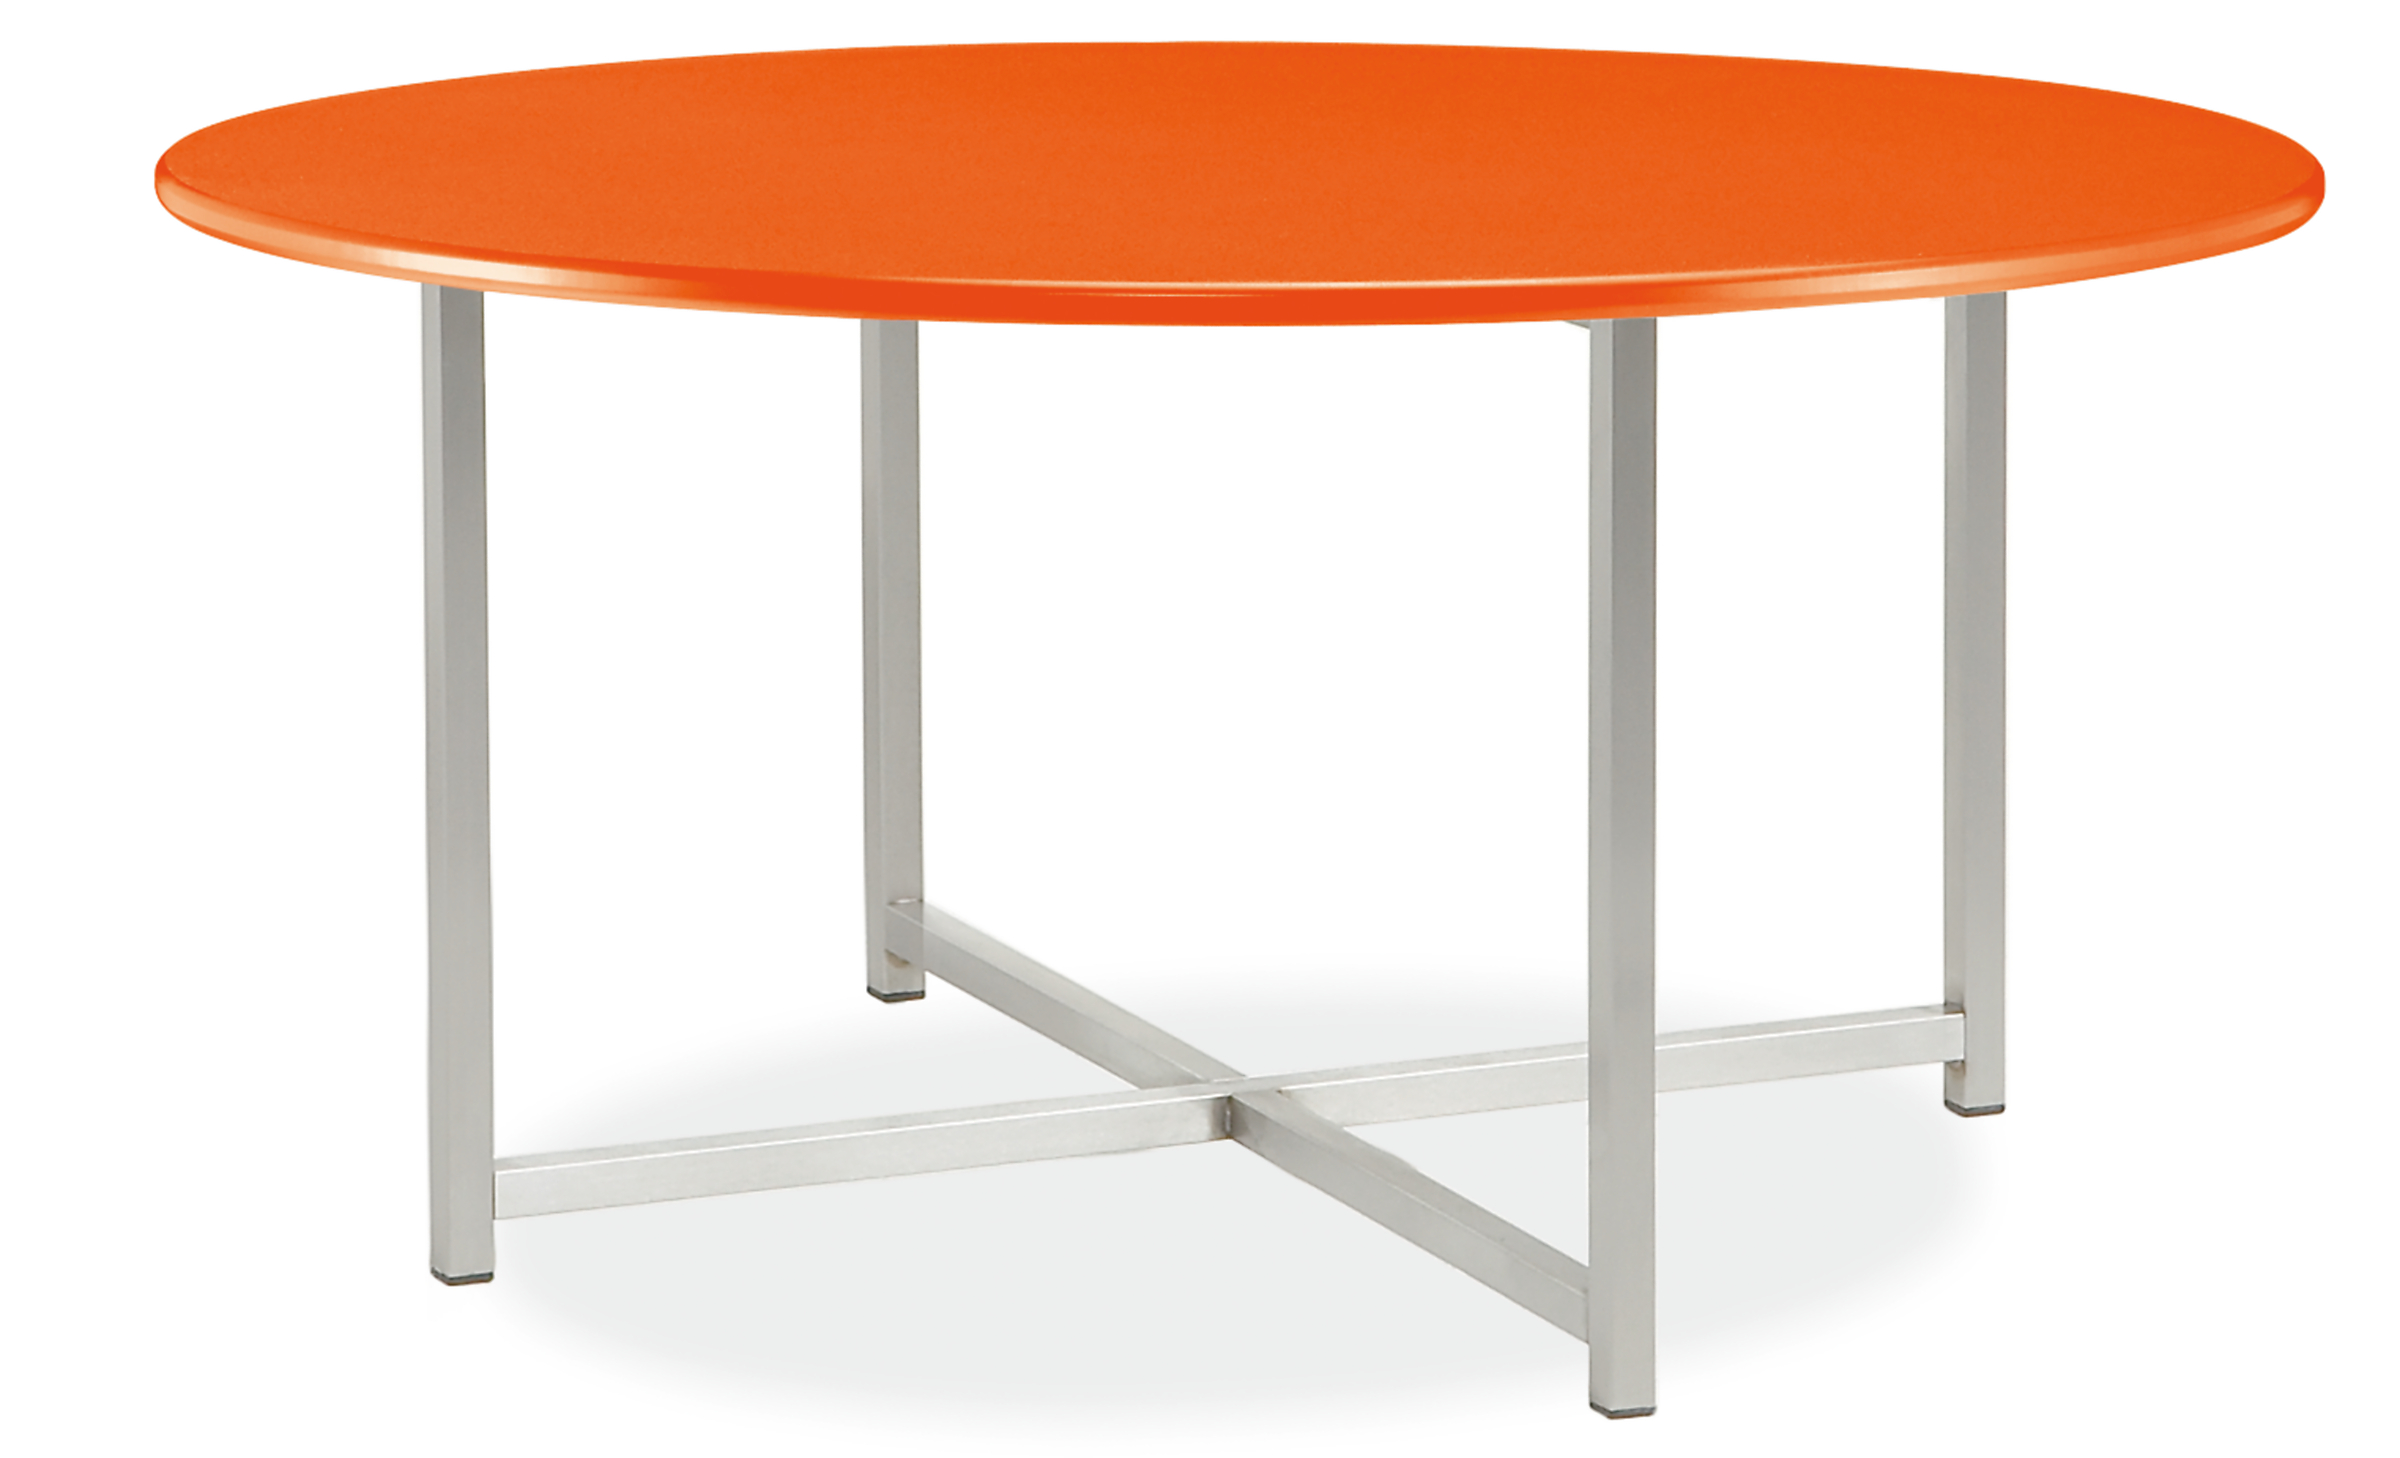 Classic 27 diam 16h Round Outdoor Coffee Table in SS w/Orange HDPE Top